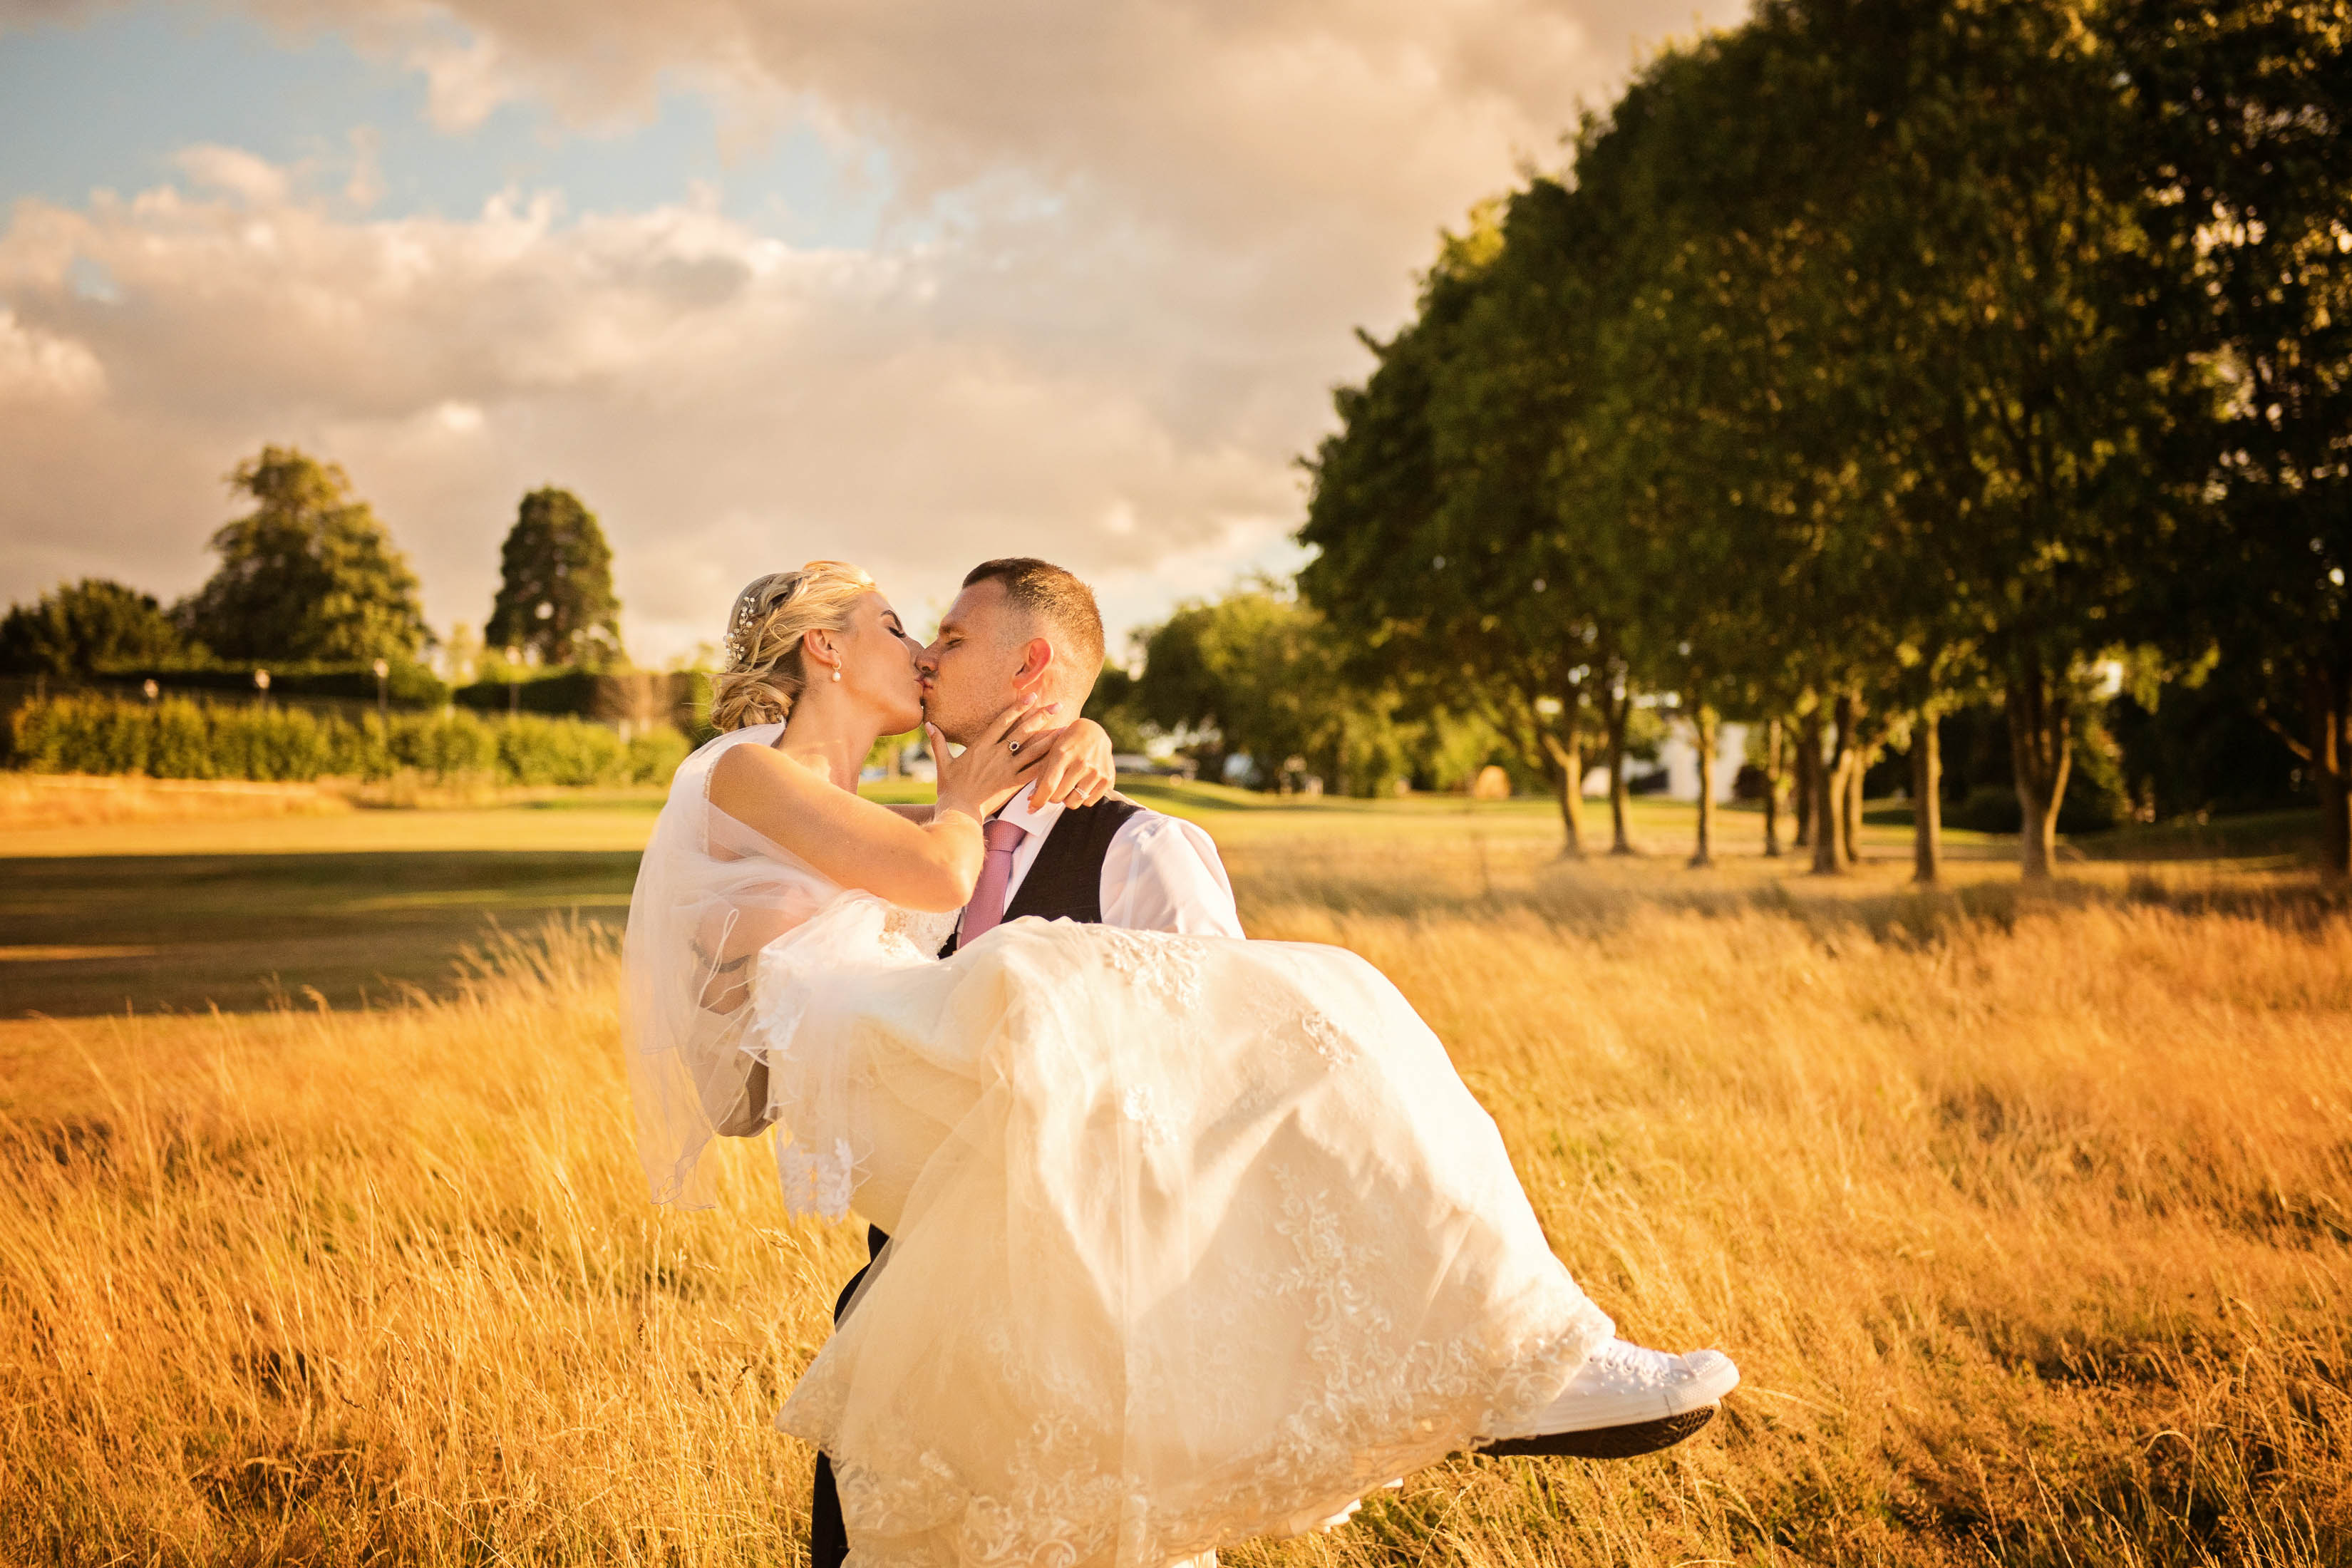 Groom carrying bride (whilst they kiss), during golden hour. 